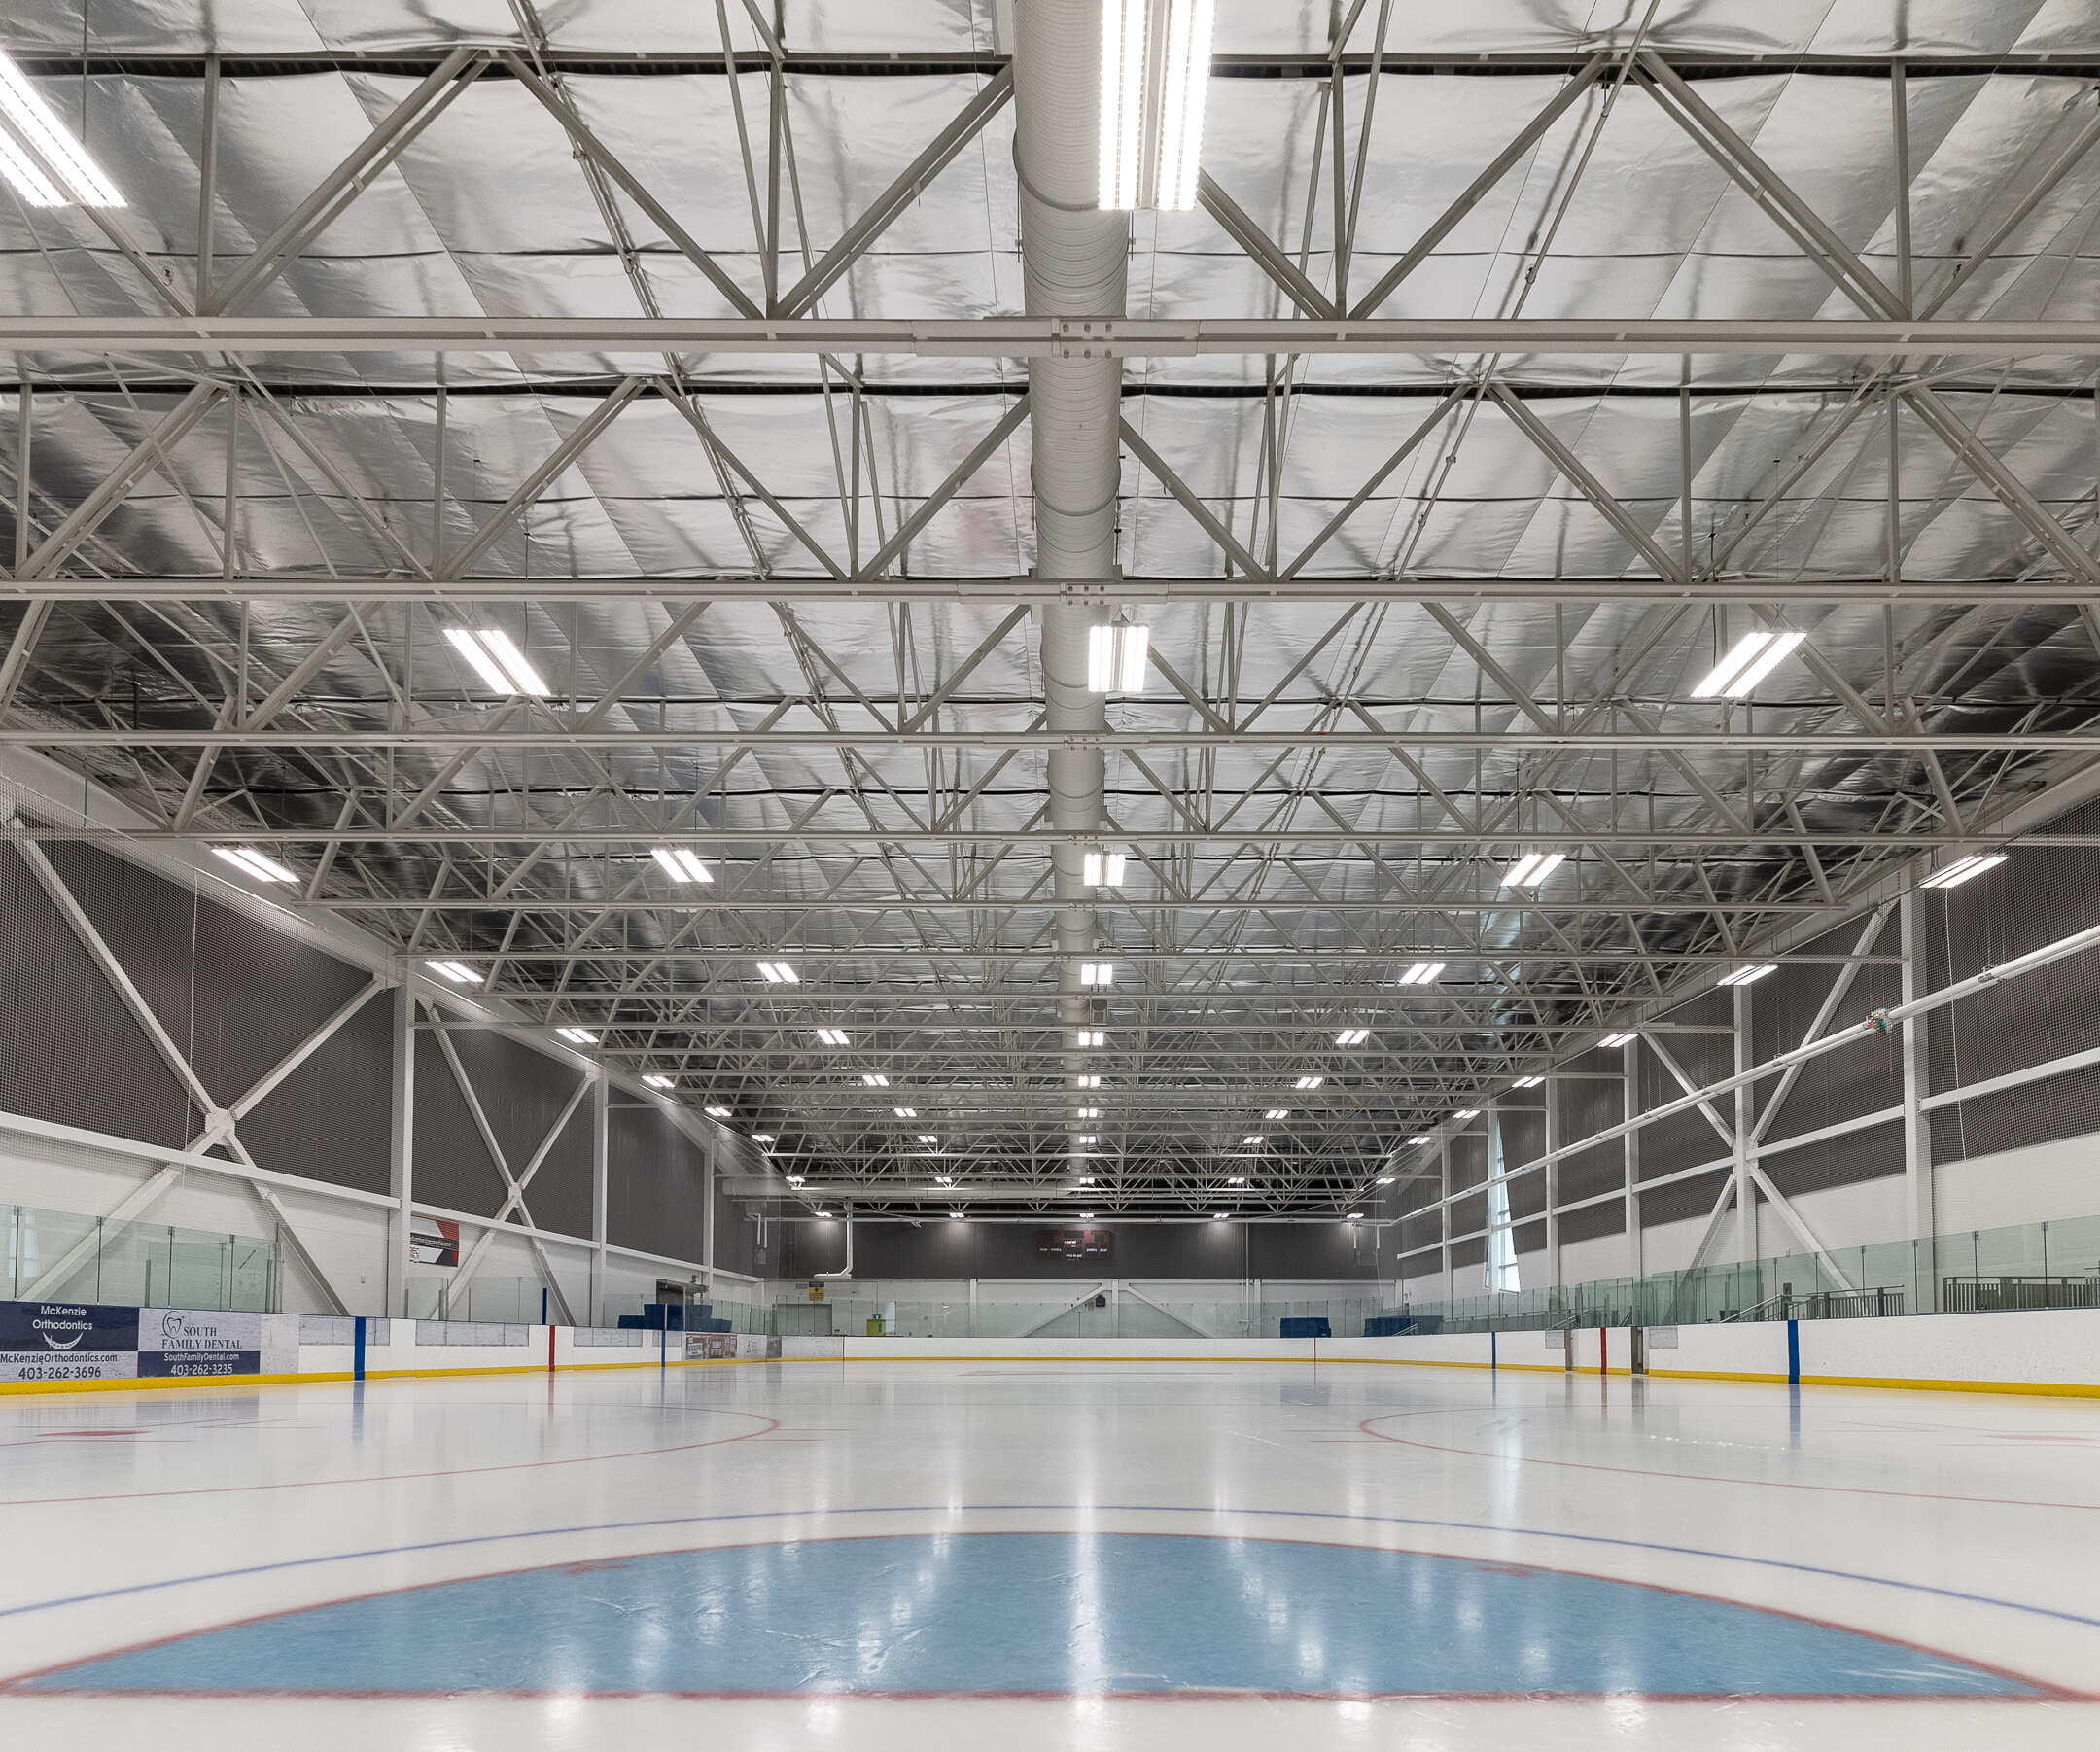  Ice arena at the YMCA at Seton, with arena soundsystem installed in the roof. 